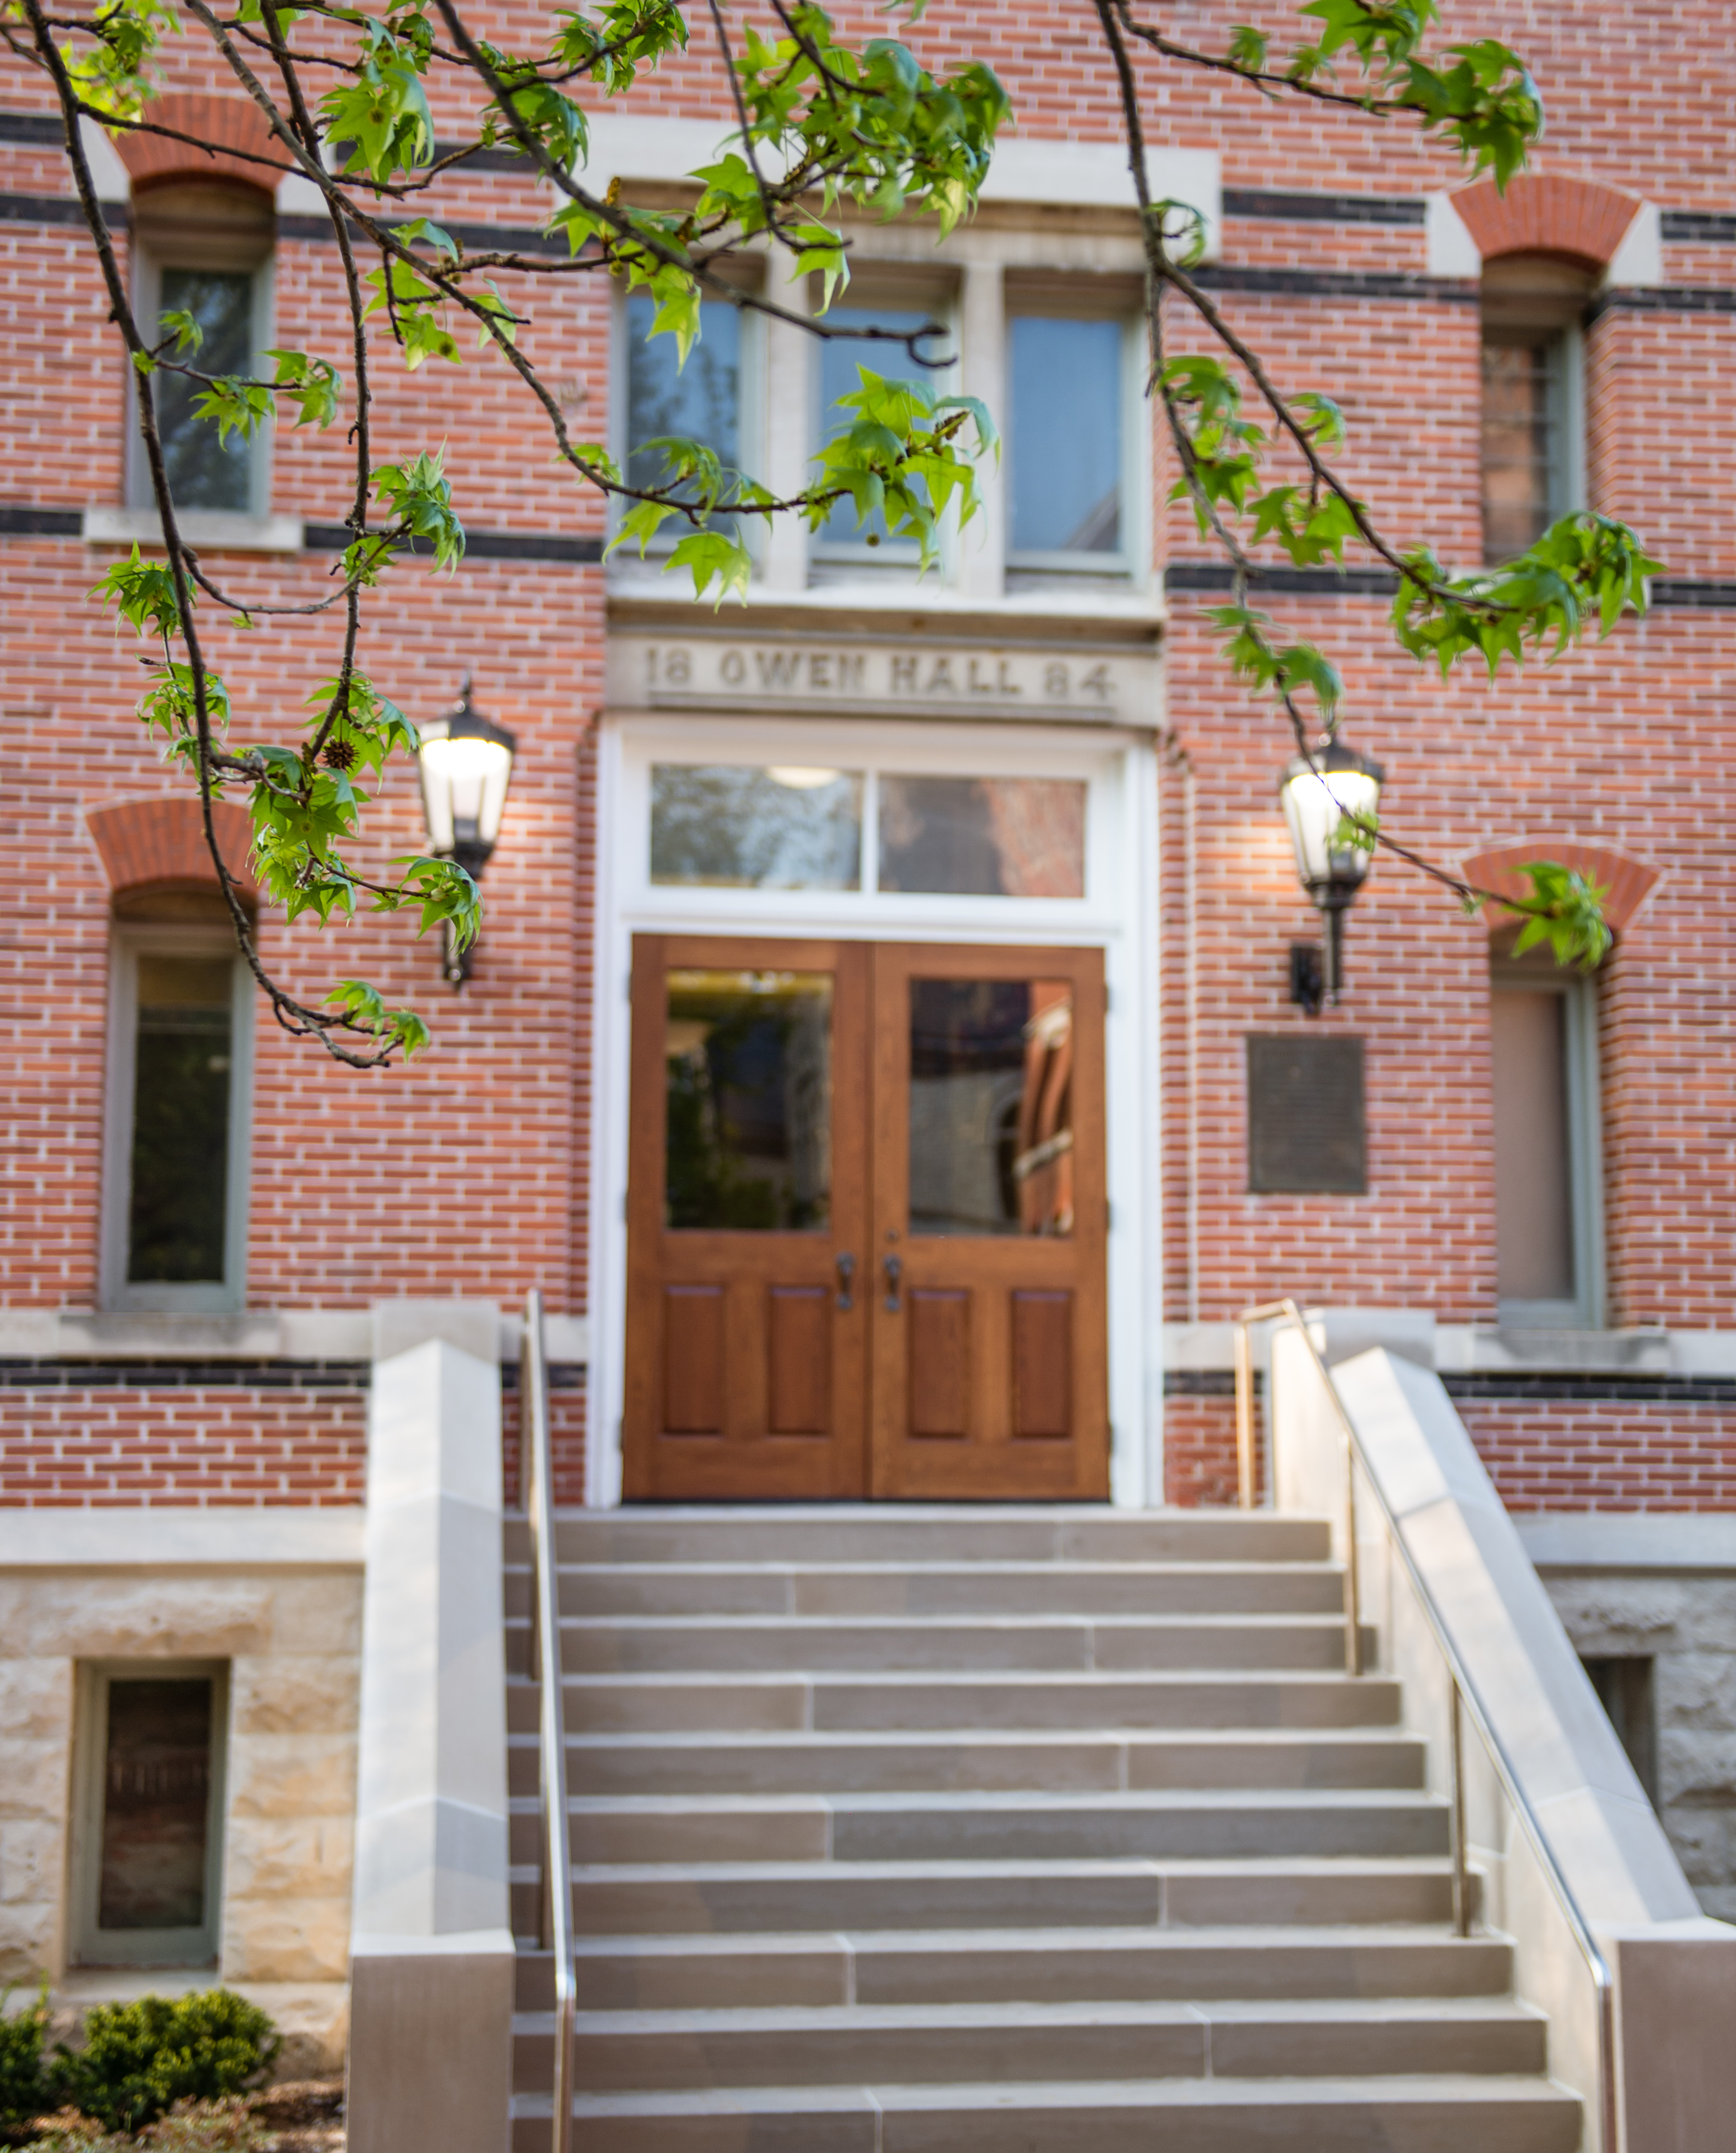 A welcoming picture of the entrance of Owen Hall, where the administrative offices of the College of Arts + Sciences are located.